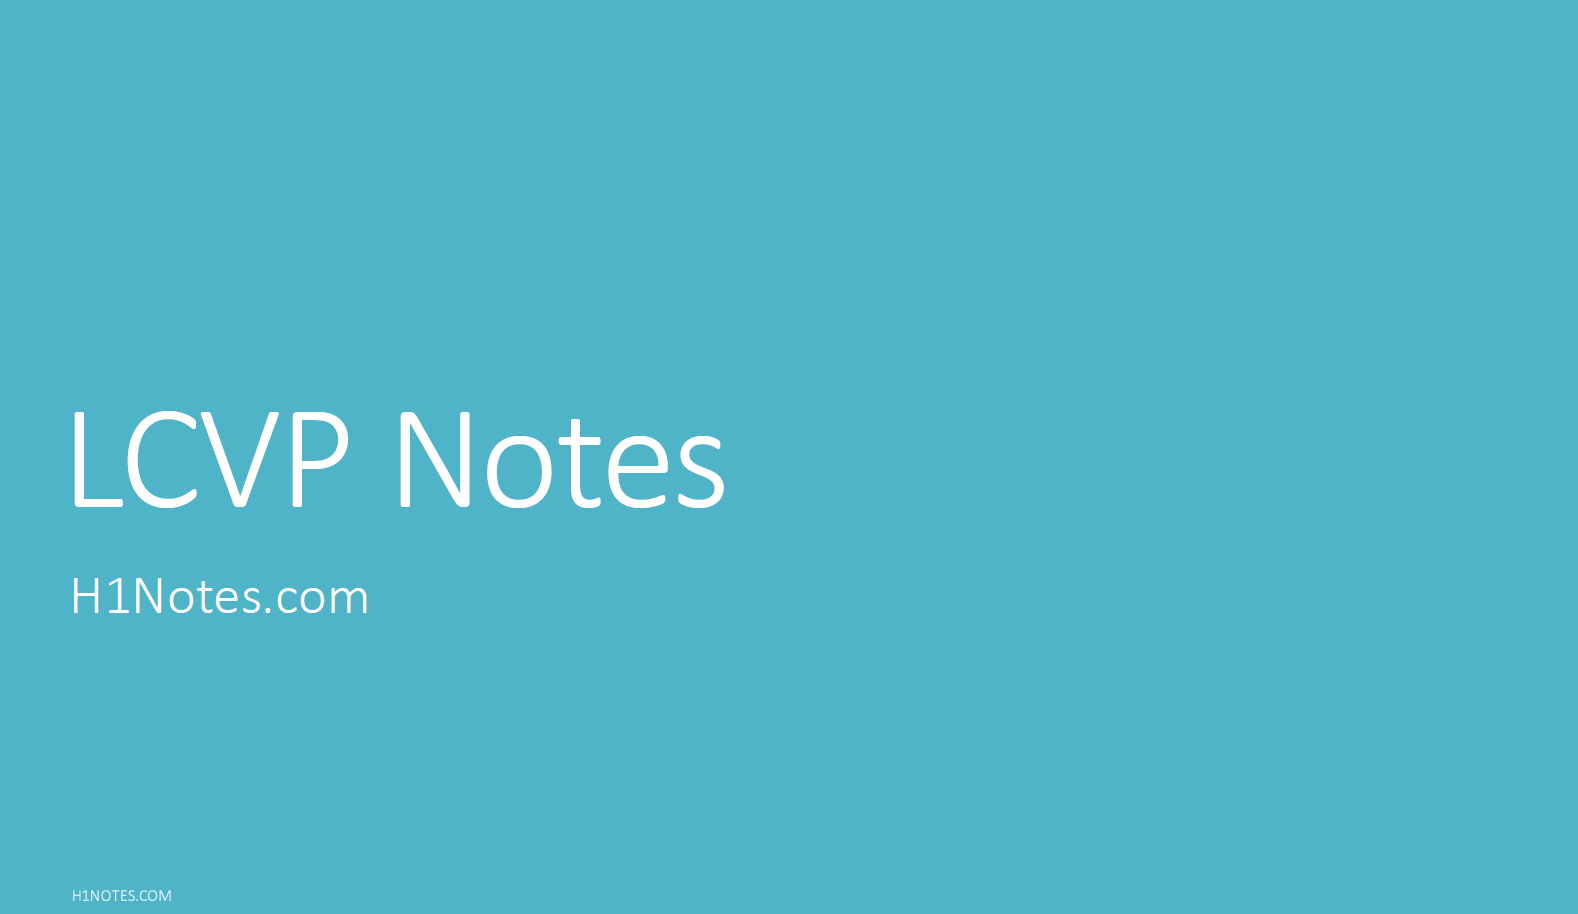 Link Modules Notes